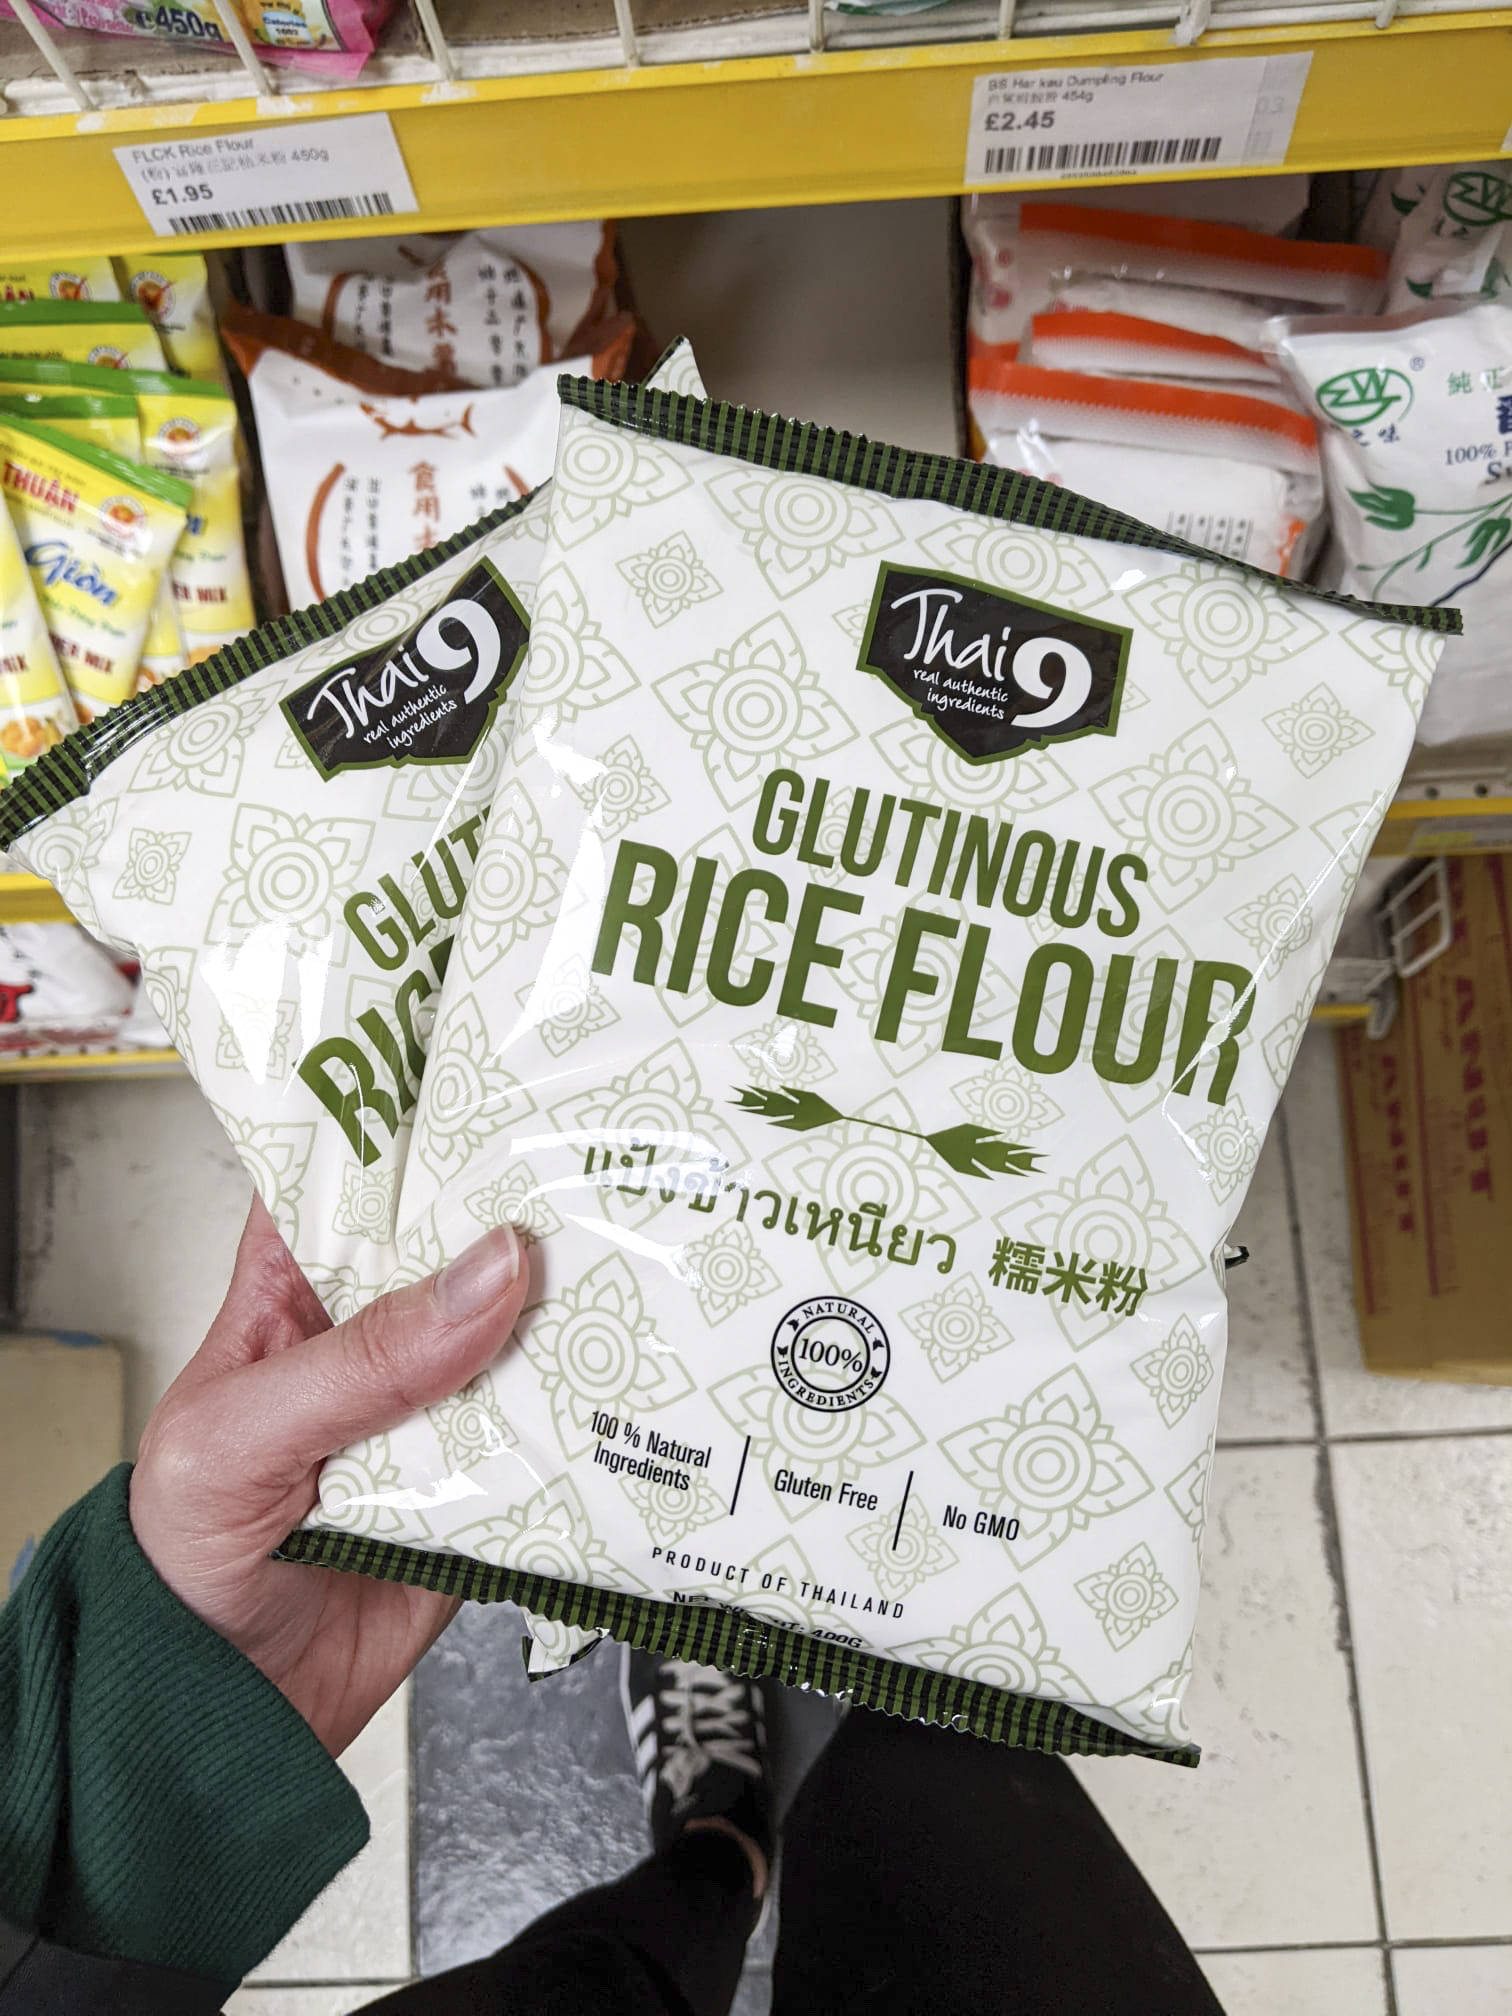 Bags of Thai glutinous rice flour found in a Chinese supermarket in London